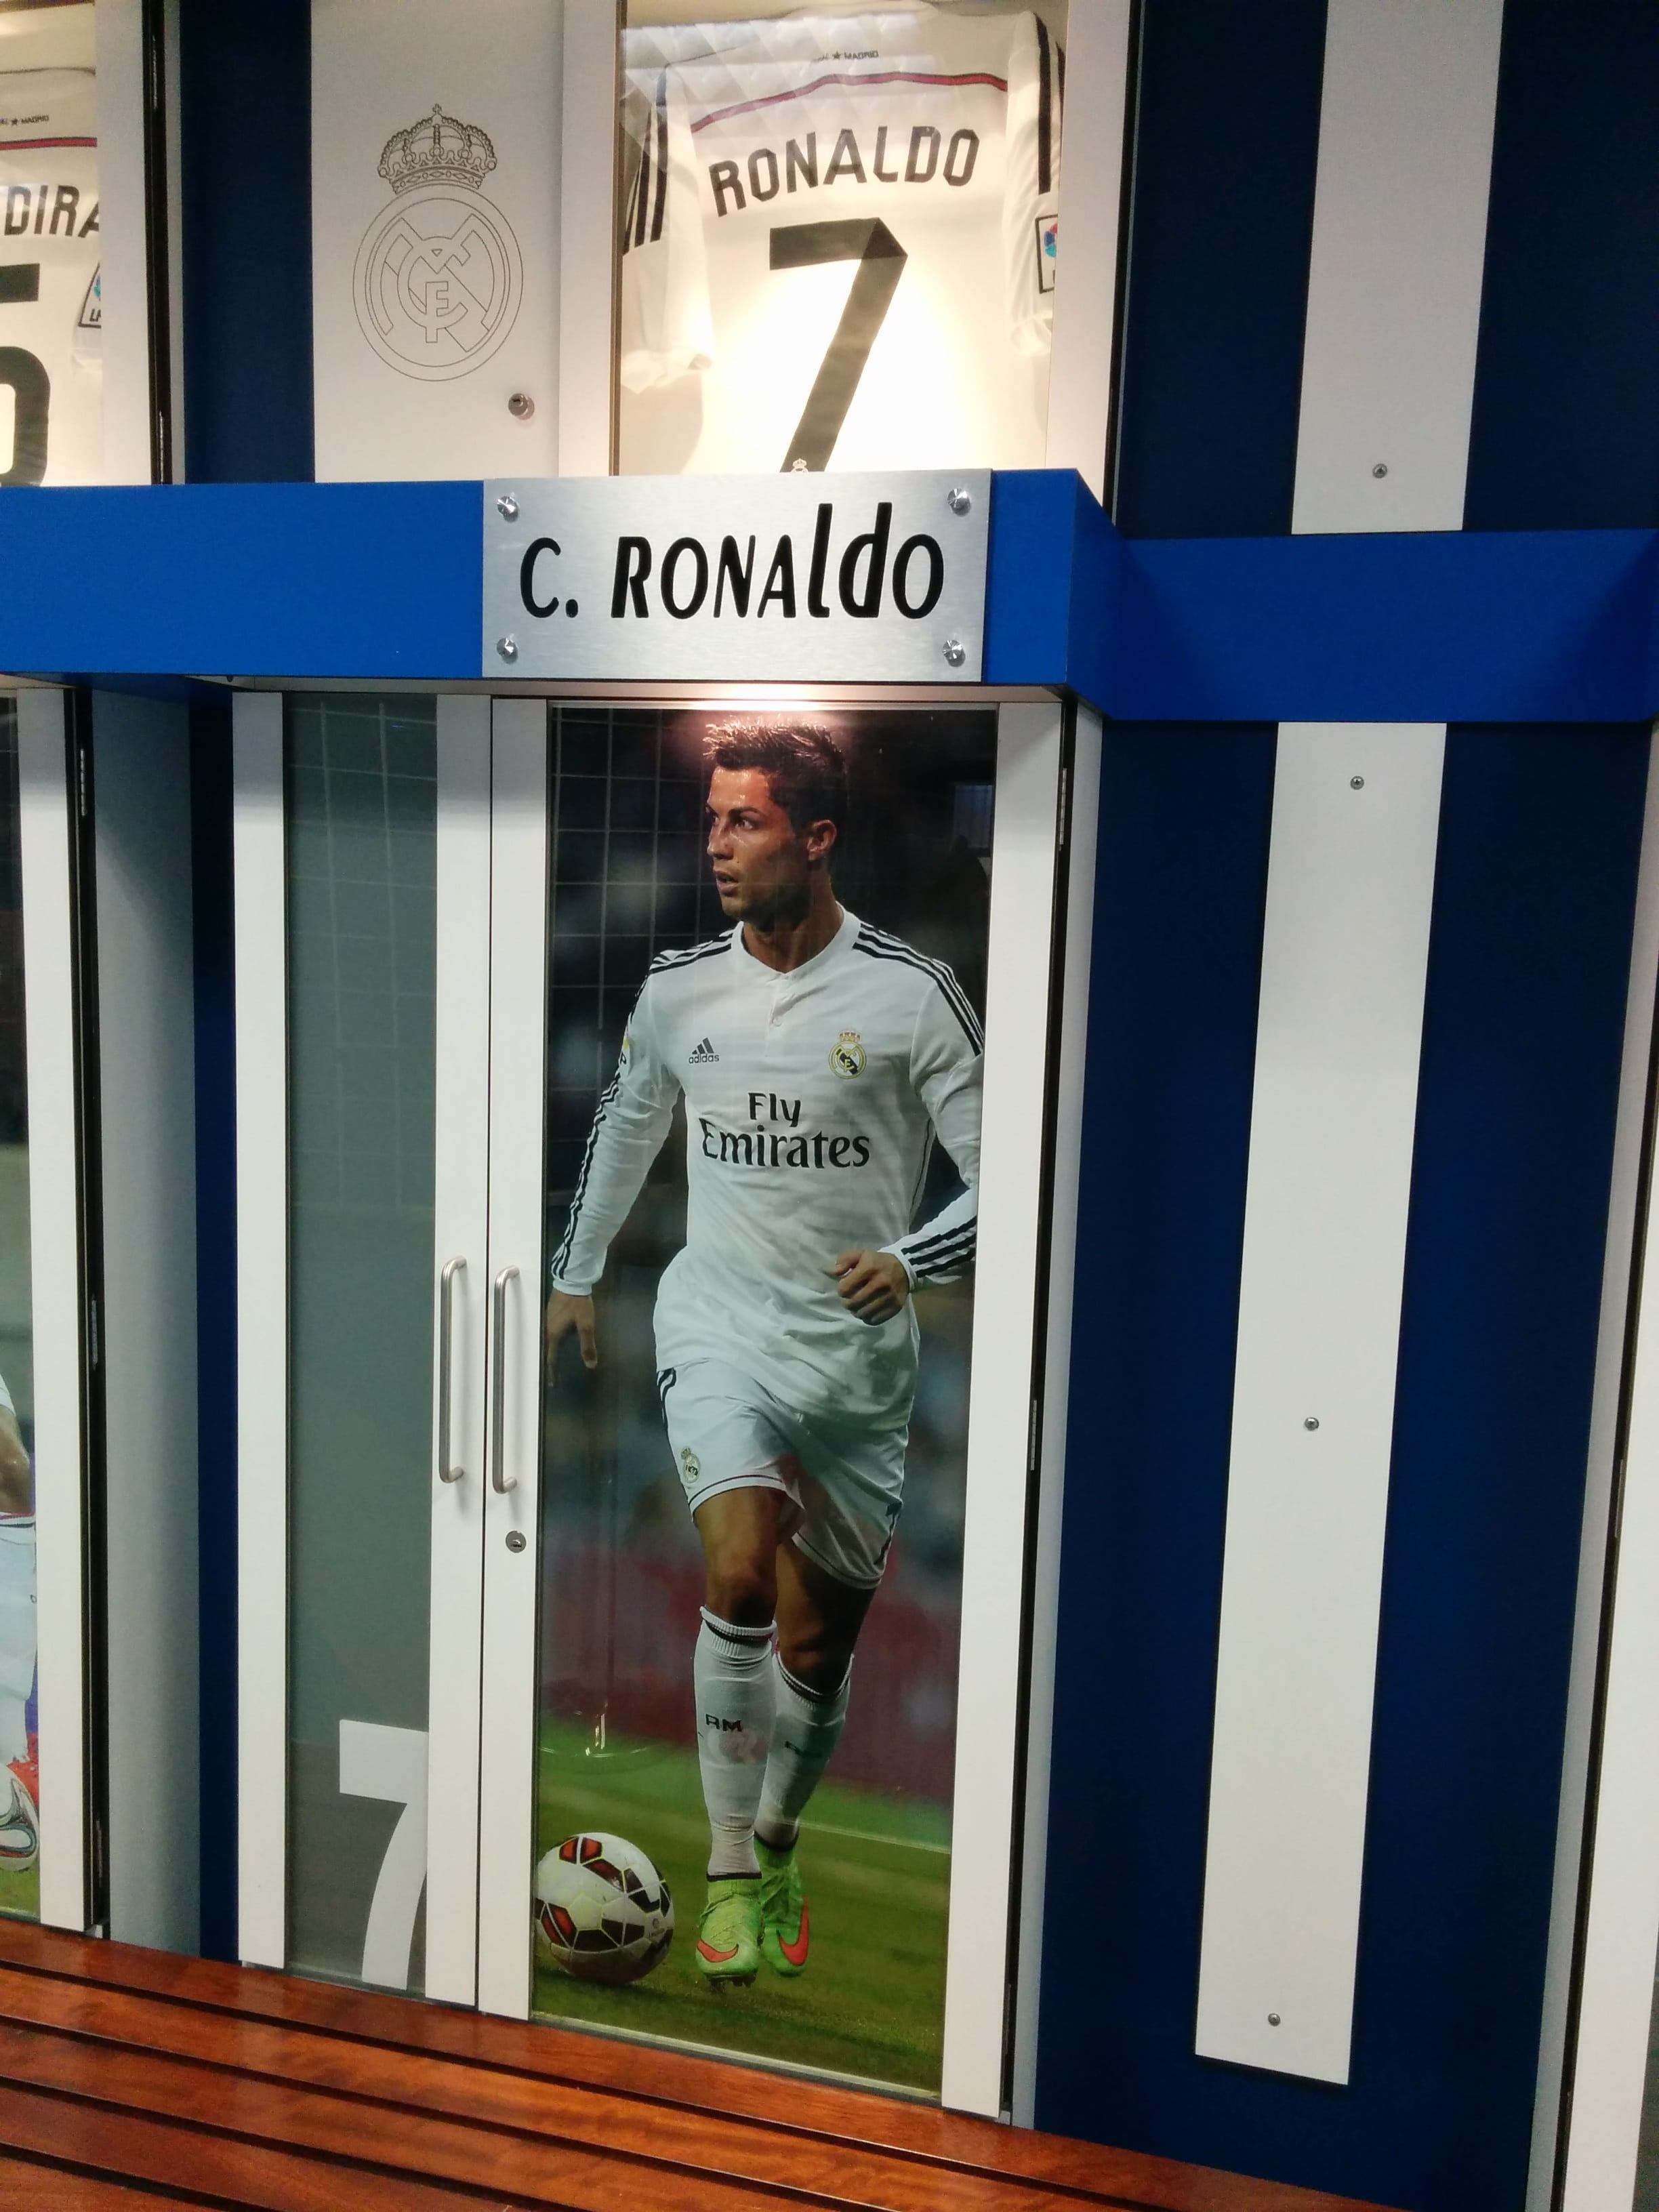 Cristiano Ronaldo lighted poster on wall, Costumes, Football